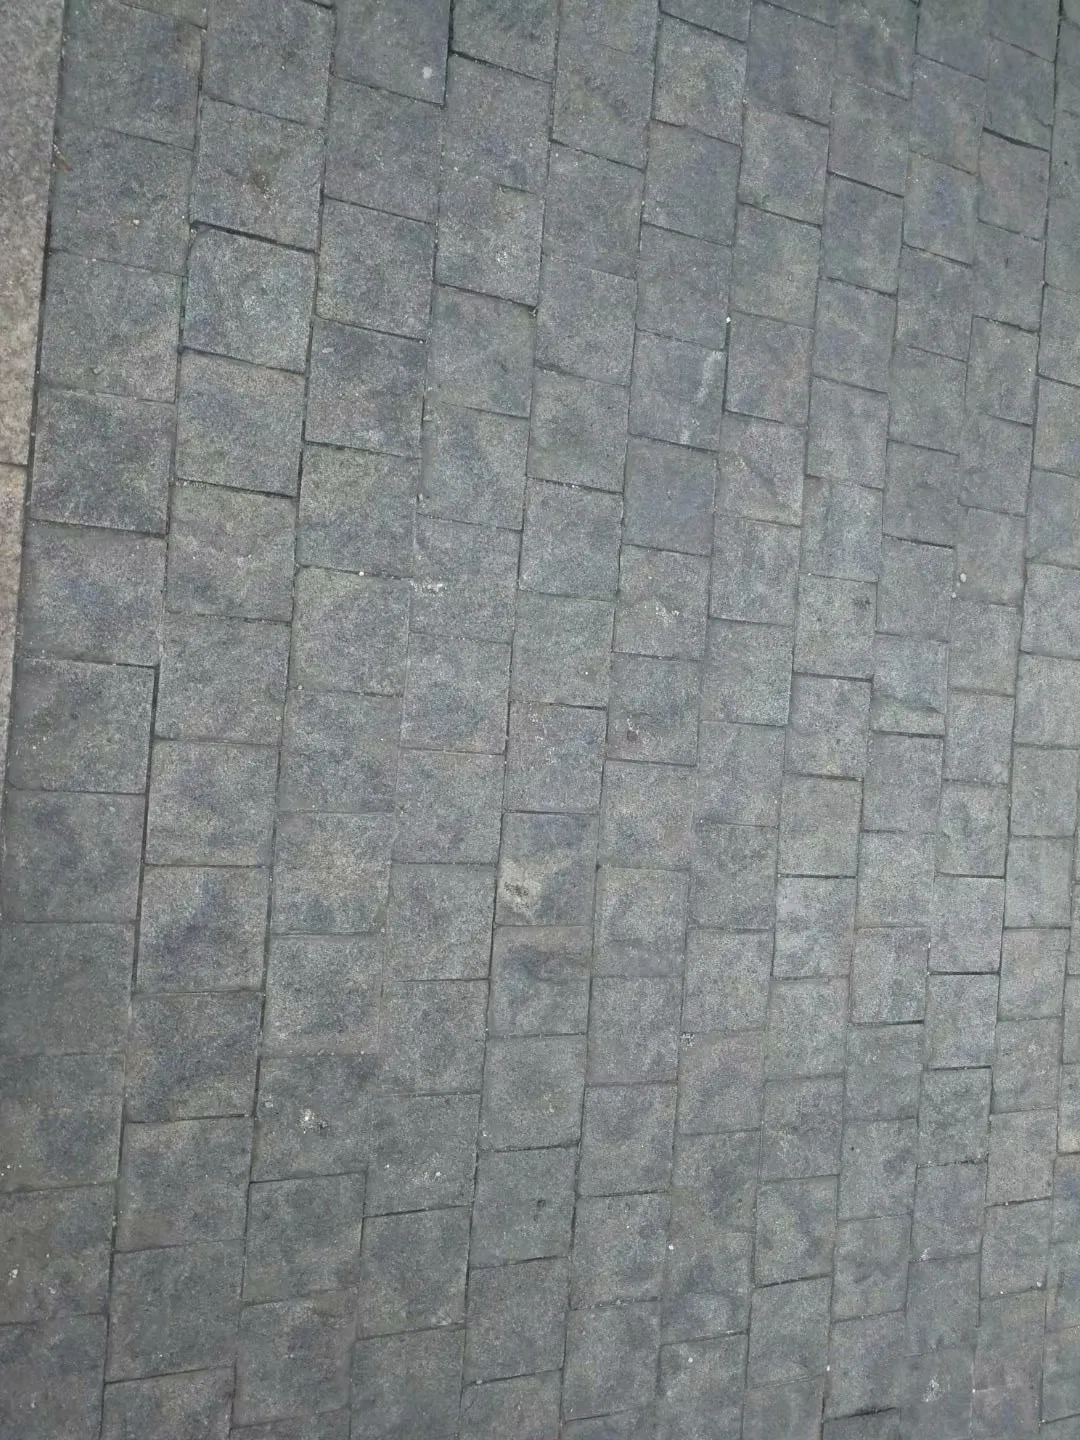 Hot Strongest Handmade Paving Stone G603 Light Grey Granite Garden Paving Cobble Stone Cubic Stone for Path or Driveway